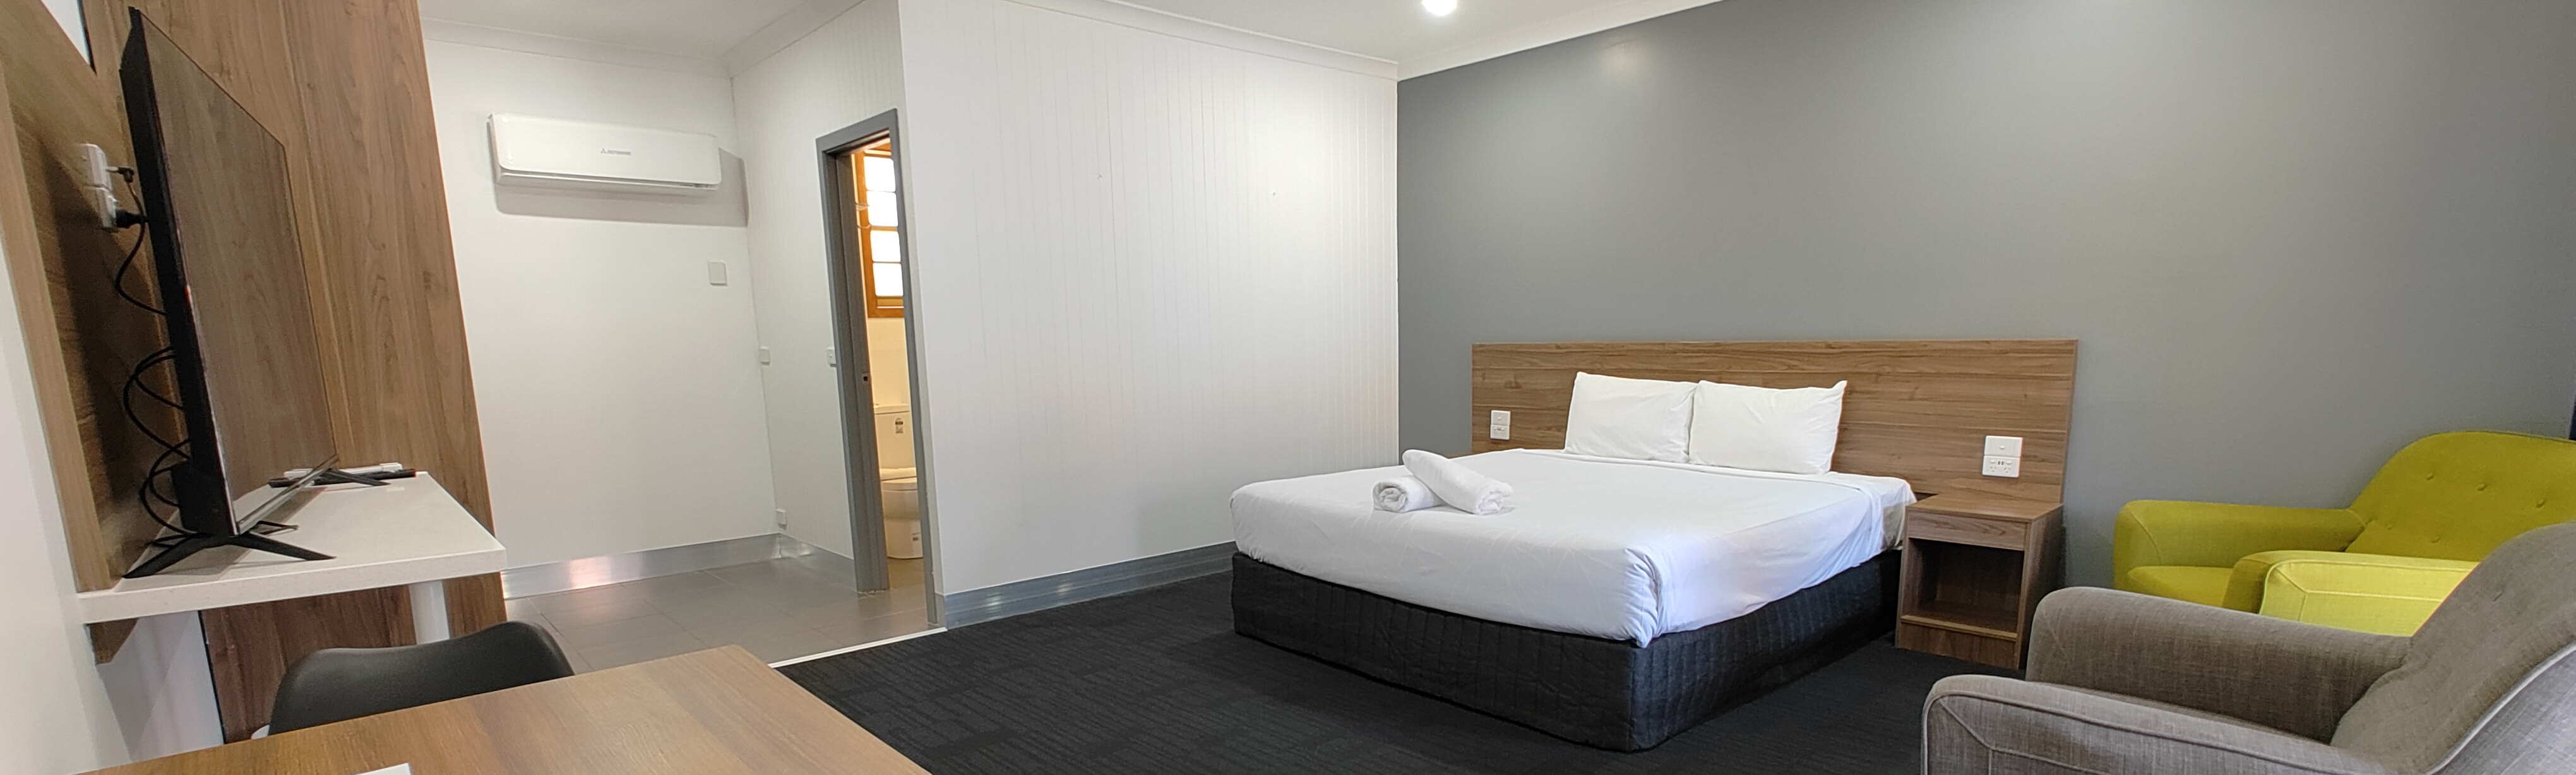 All of our rooms are well appointed, comfortable and have a high level of cleanliness.